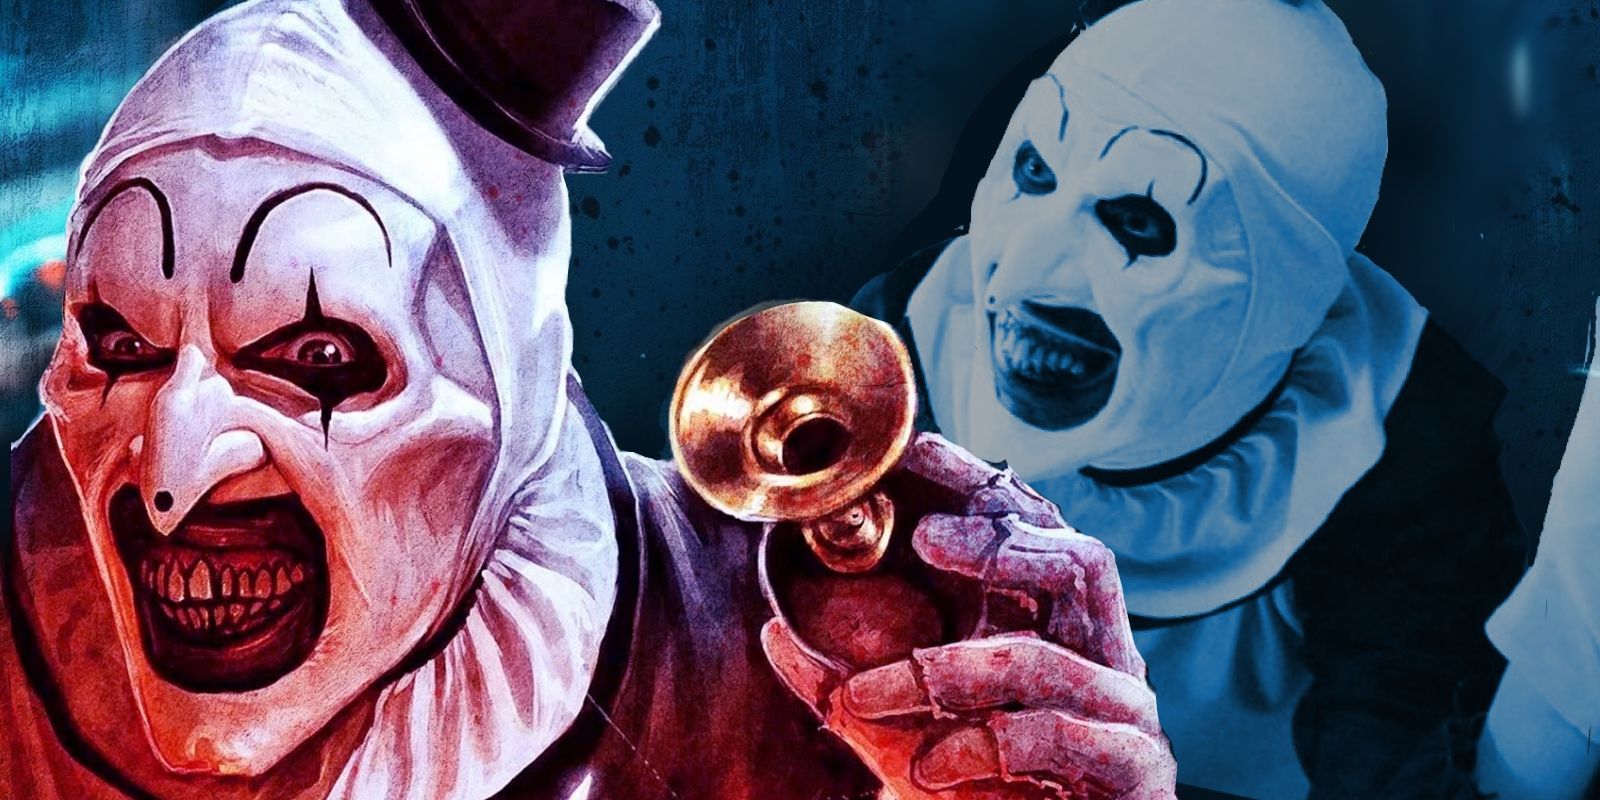 A Terrifier Theory Gives Art the Clown a Fitting Backstory